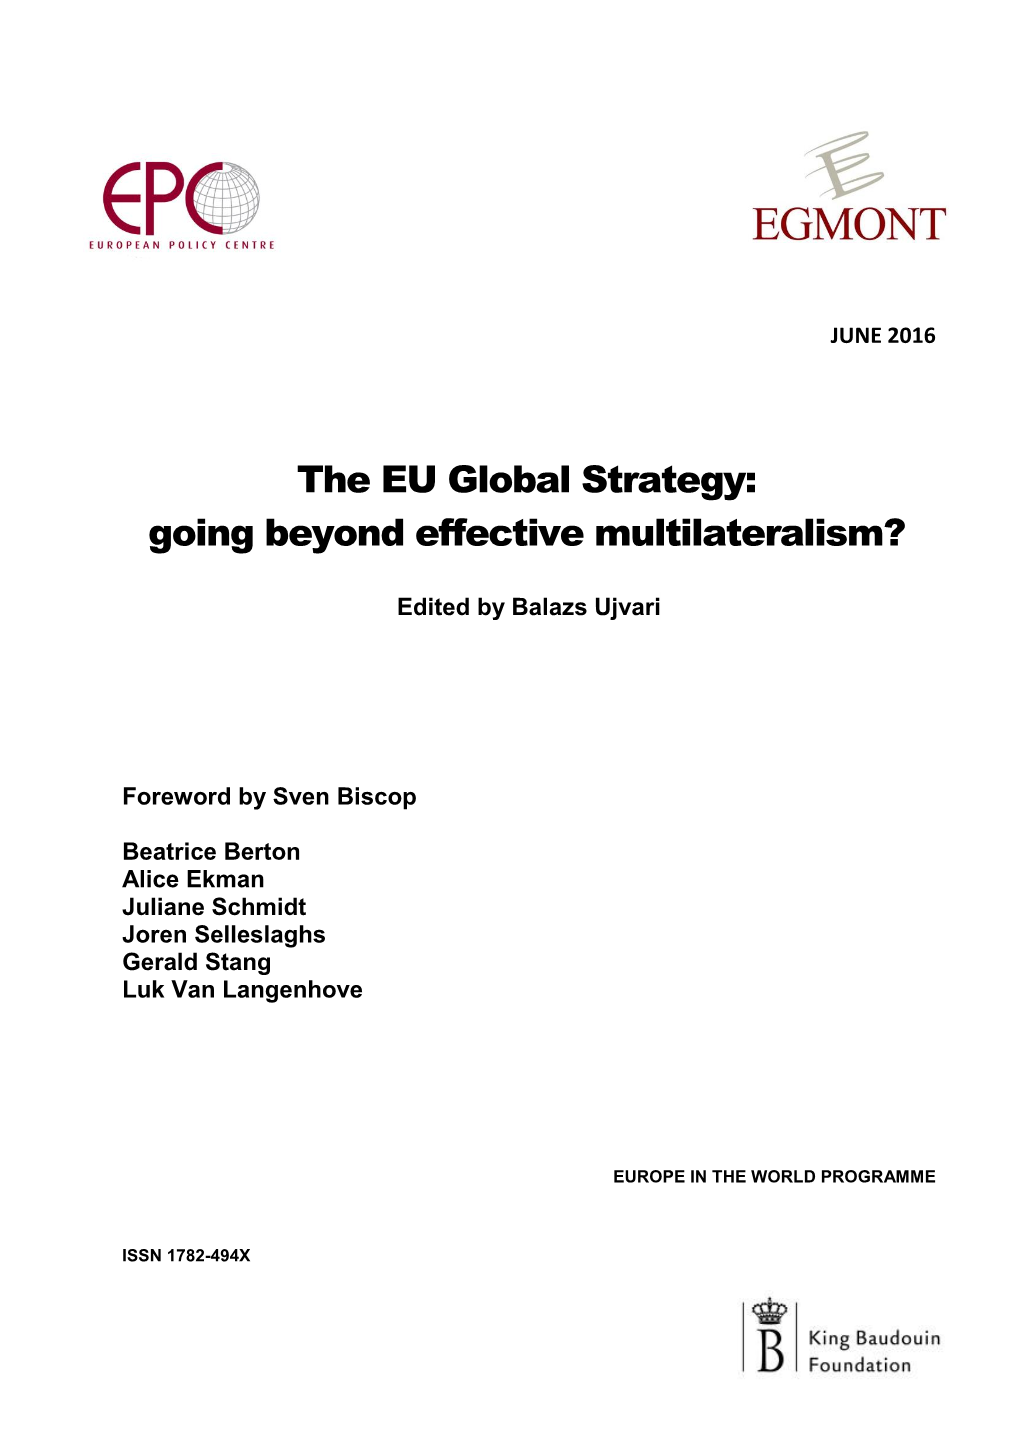 The EU Global Strategy: Going Beyond Effective Multilateralism?